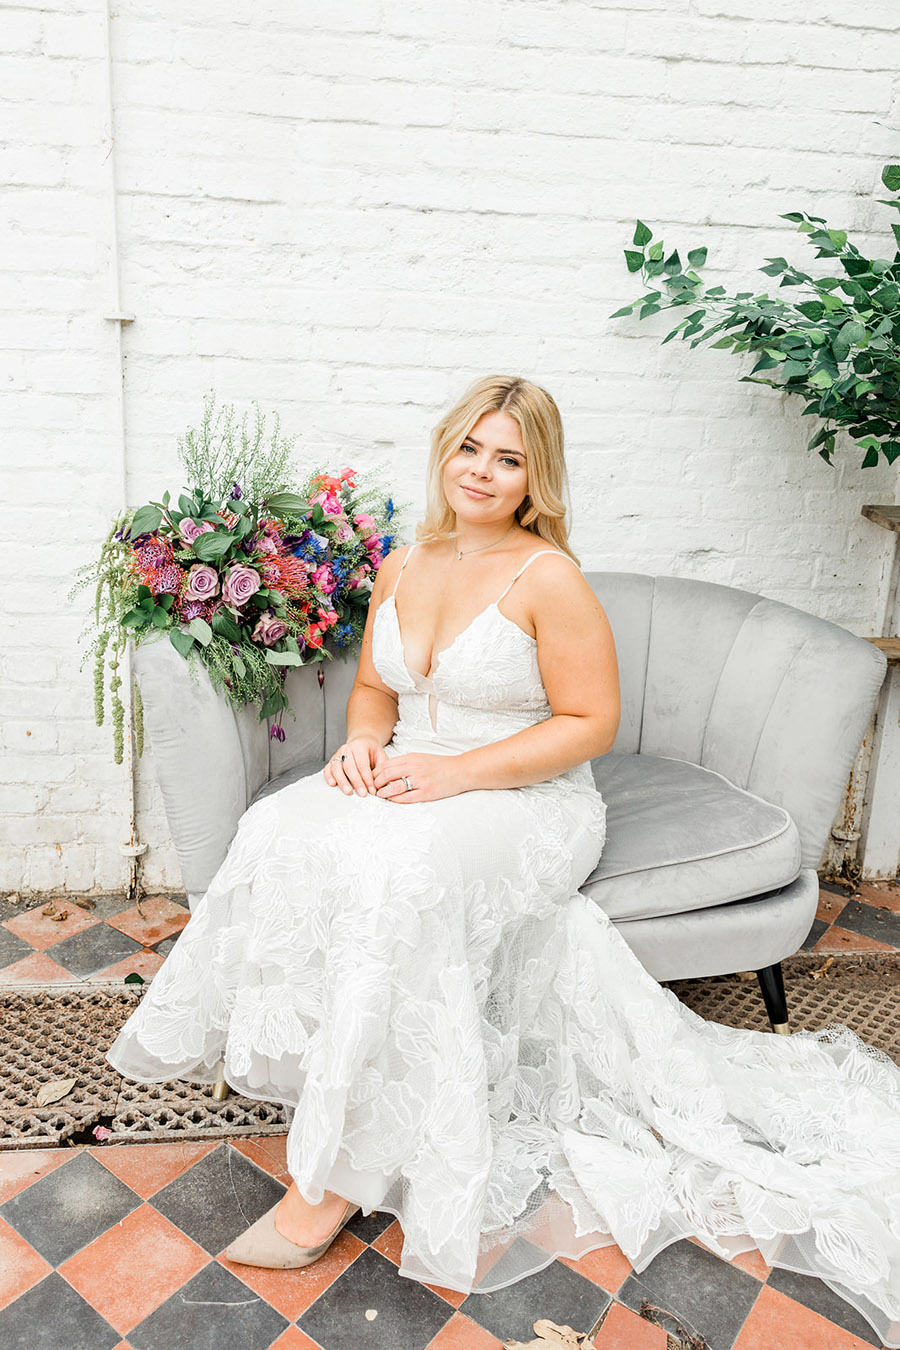 Modern intimate wedding styling inspiration from Slindon House, image credit Kelsie Scully (8)